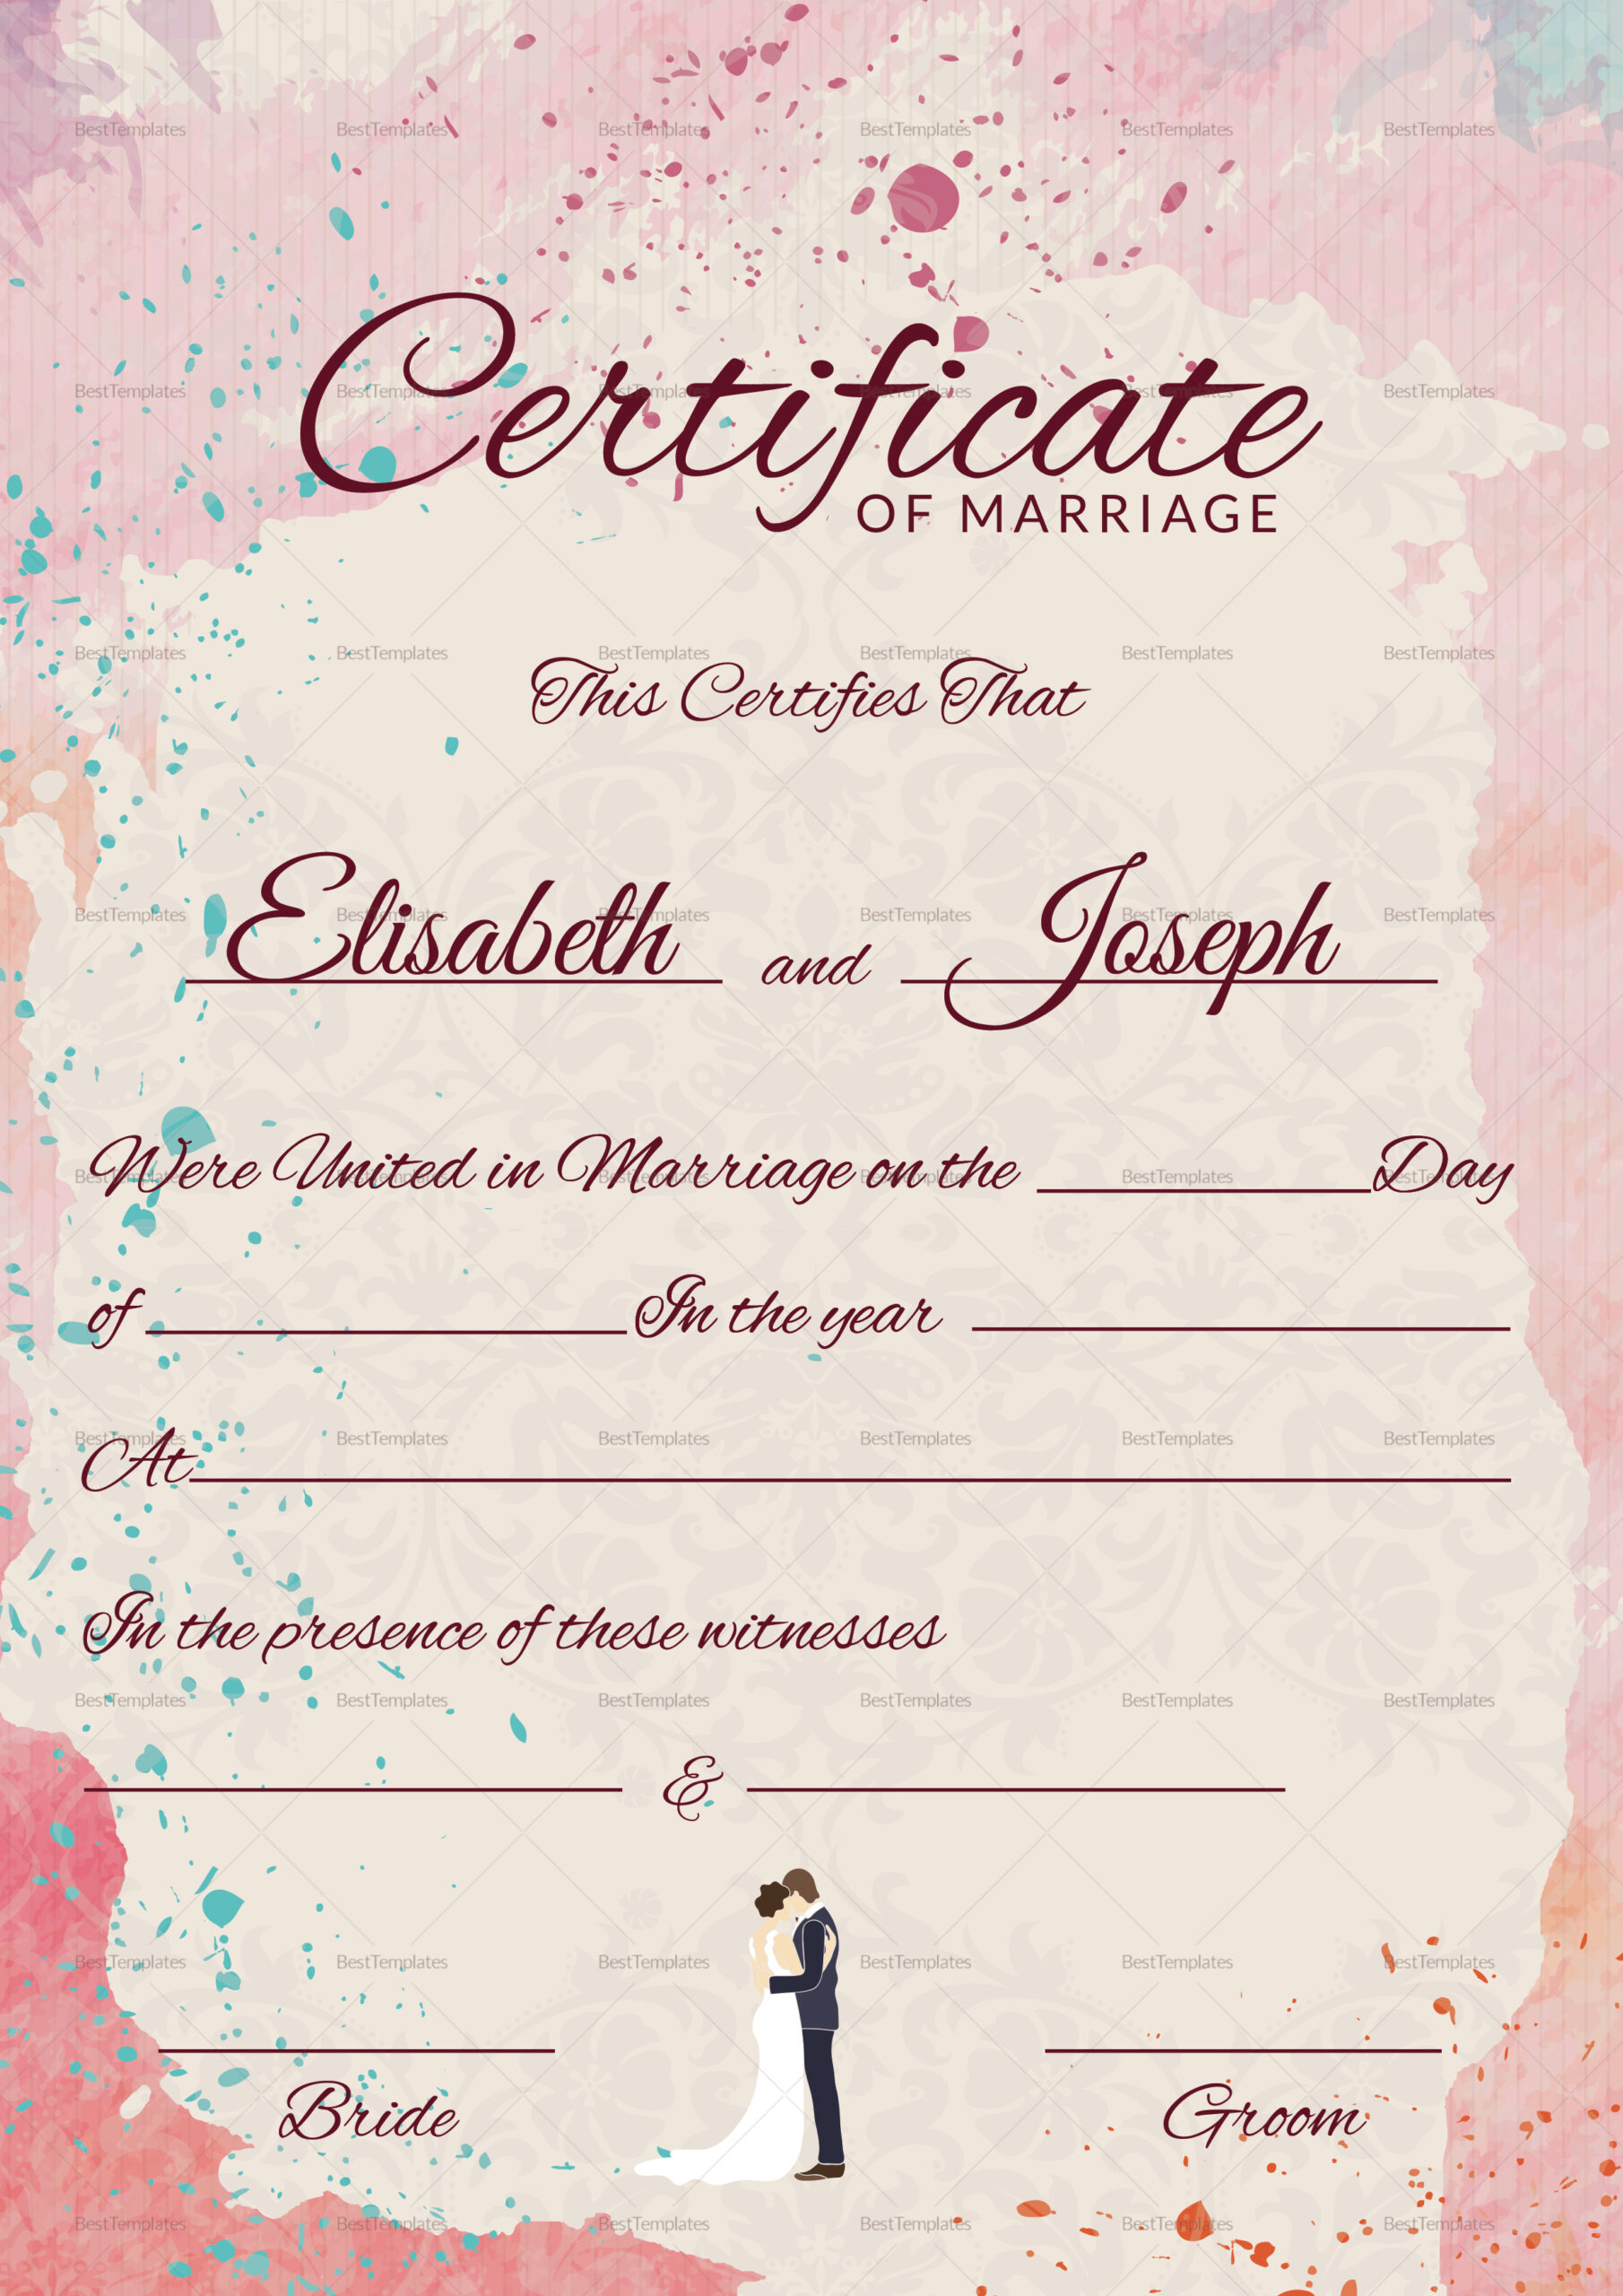 Christian Marriage Certificate Template Regarding Christian Certificate Template